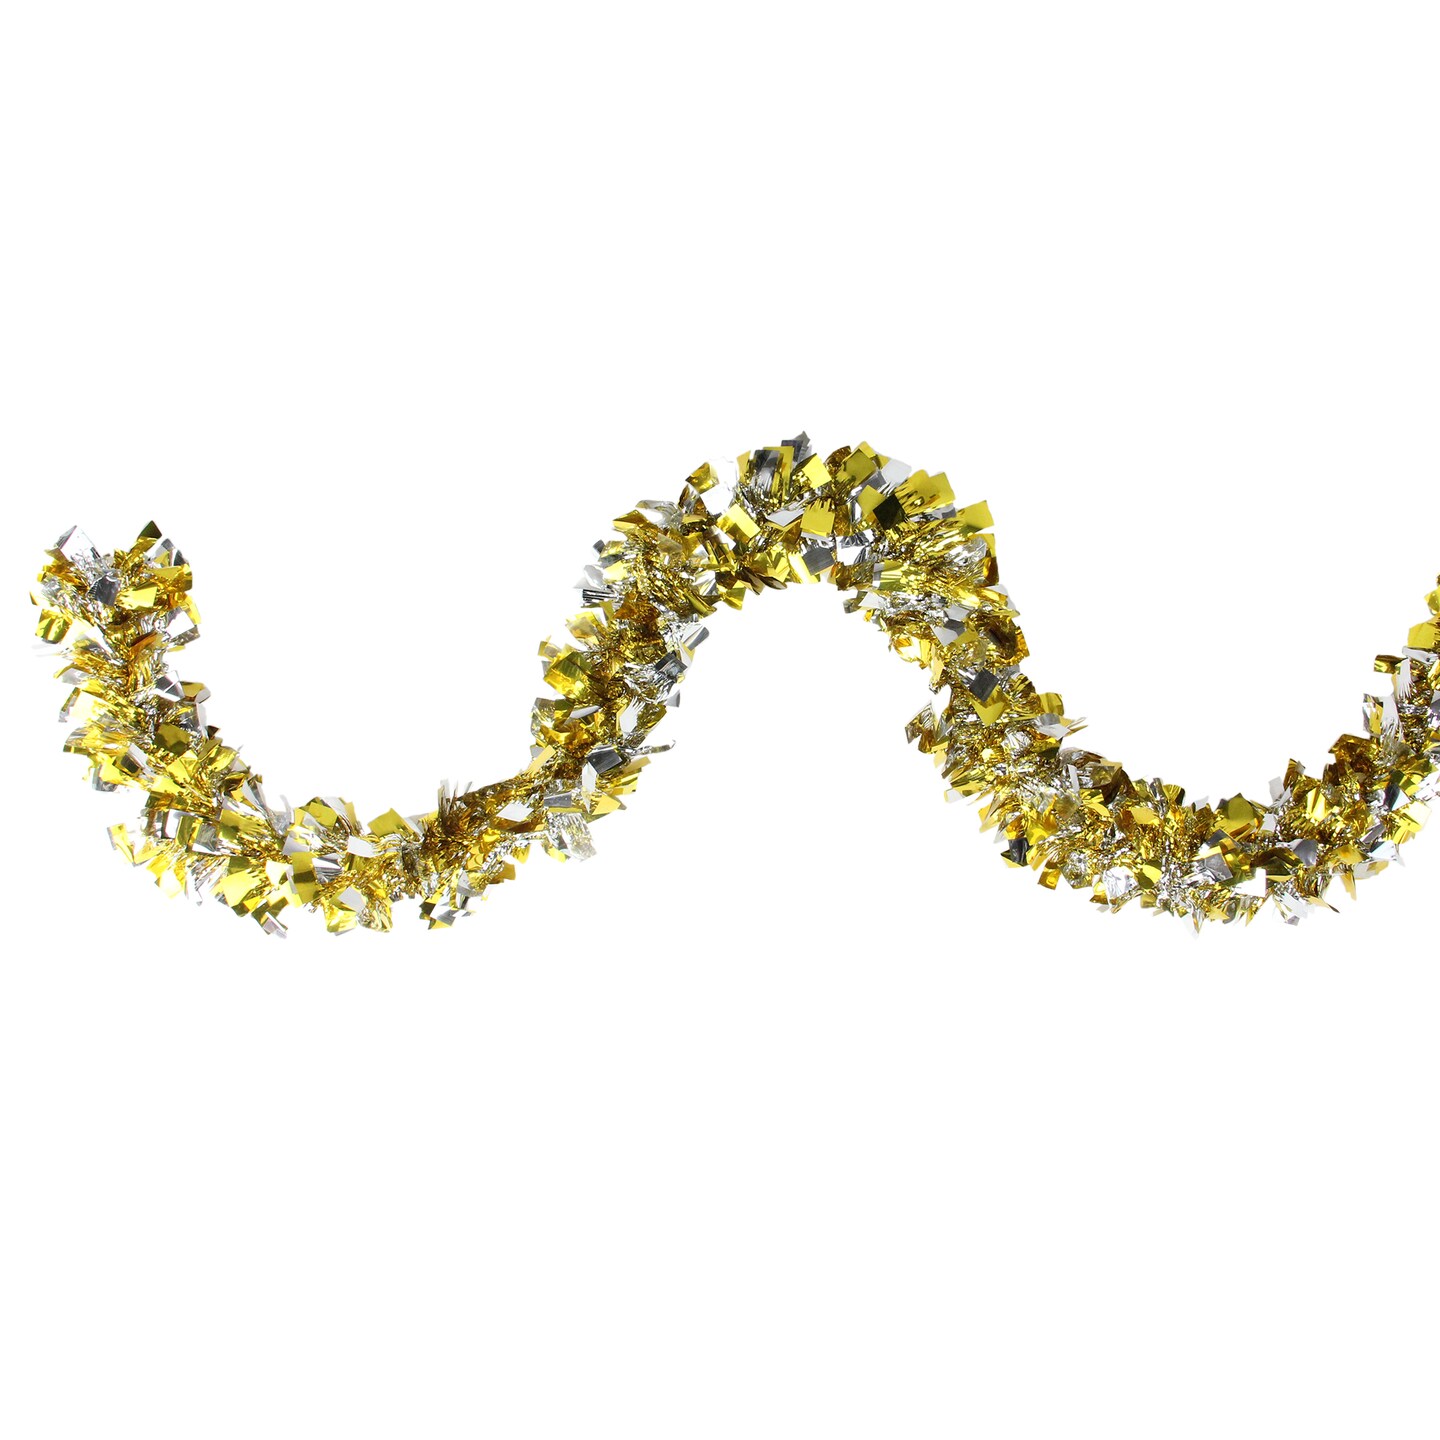 Northlight 12&#x27; x 4&#x22; Gold and Silver Boa Wide Cut Tinsel Christmas Garland - Unlit